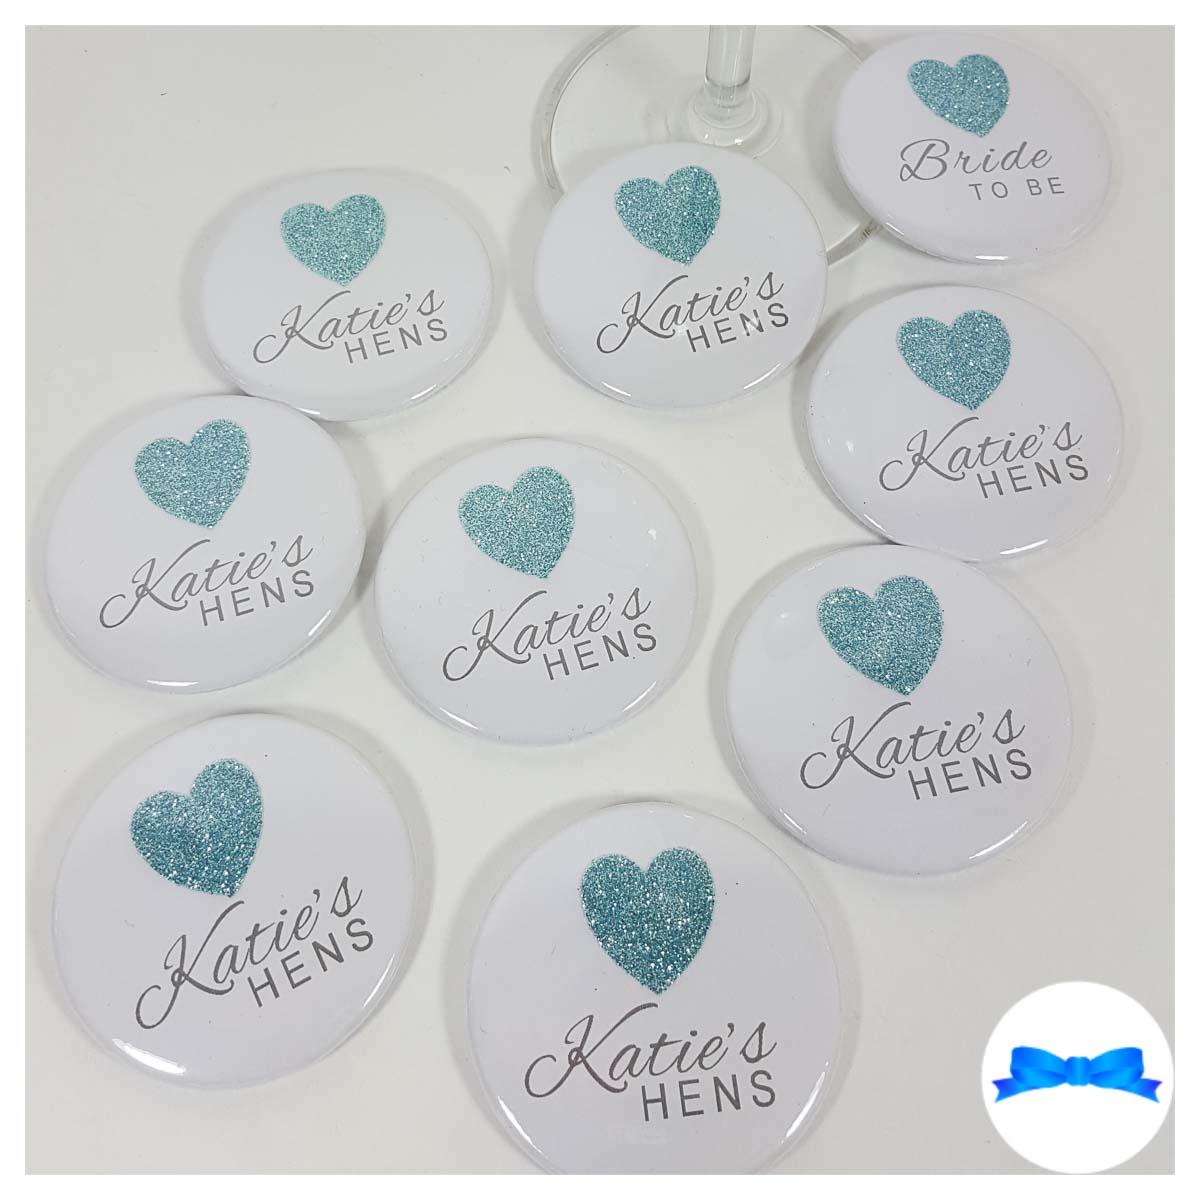 Personalised hen party badges with real blue sparkly glitter